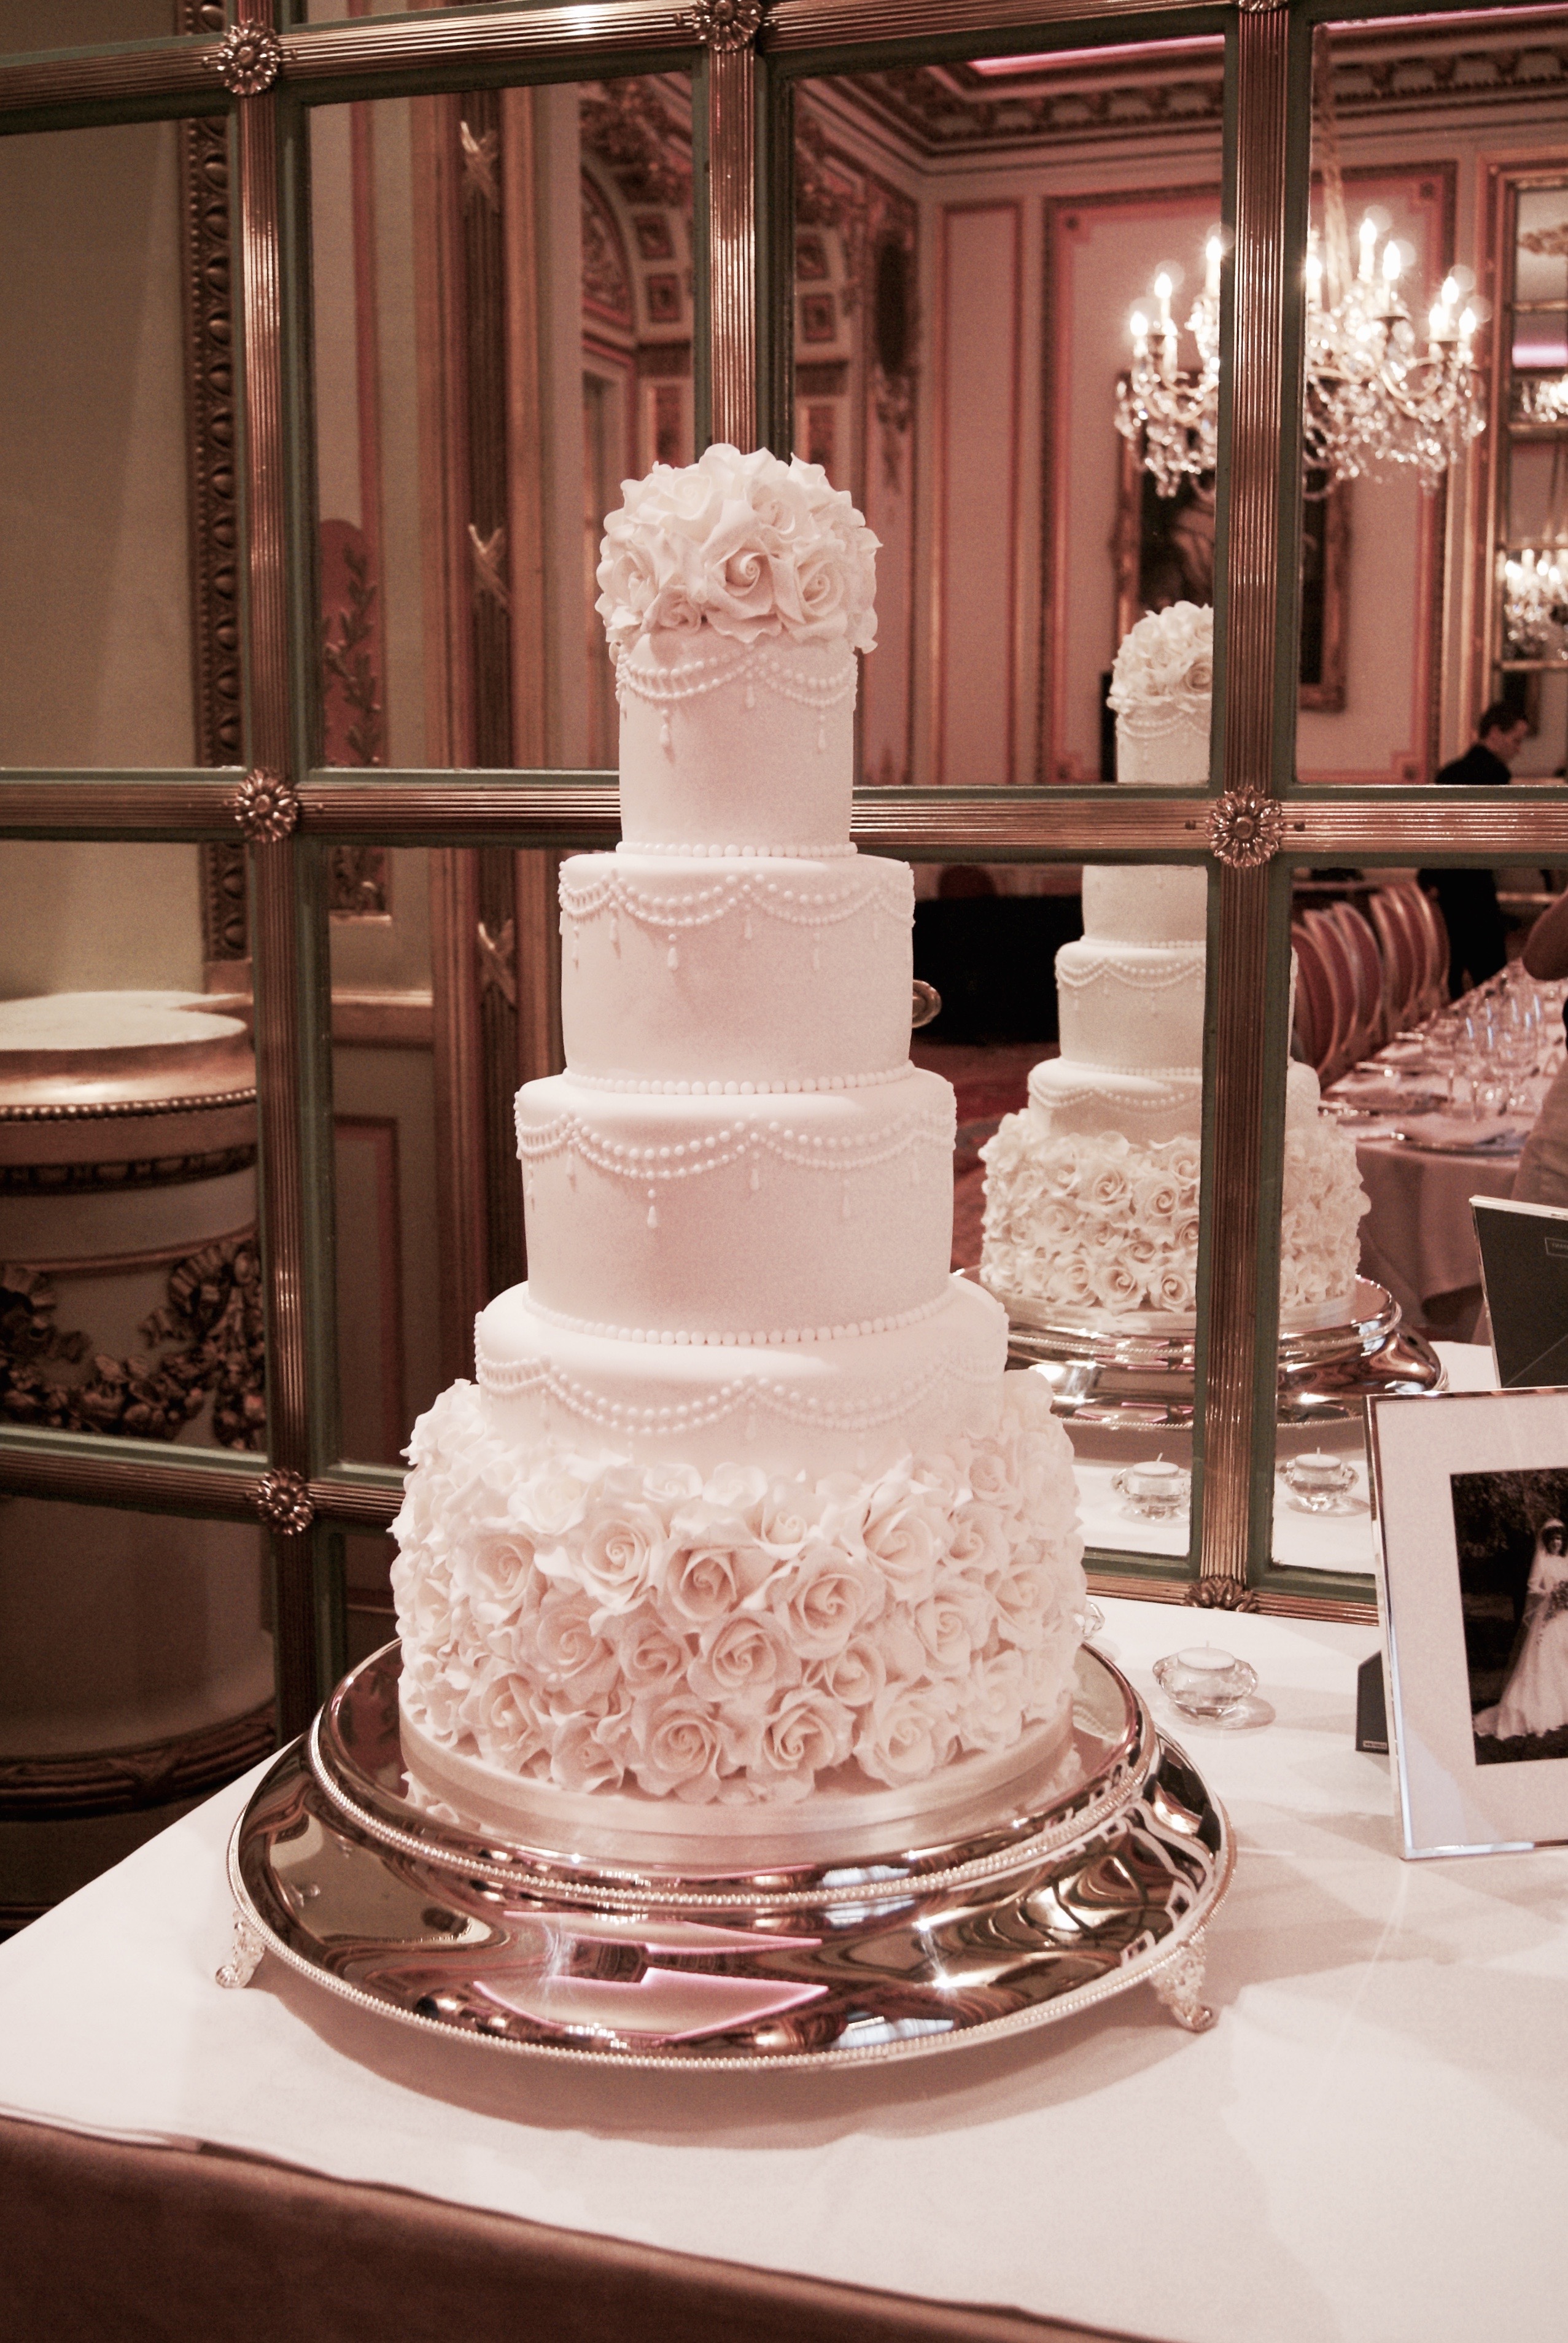 Wedding Cakes at The Ritz, London